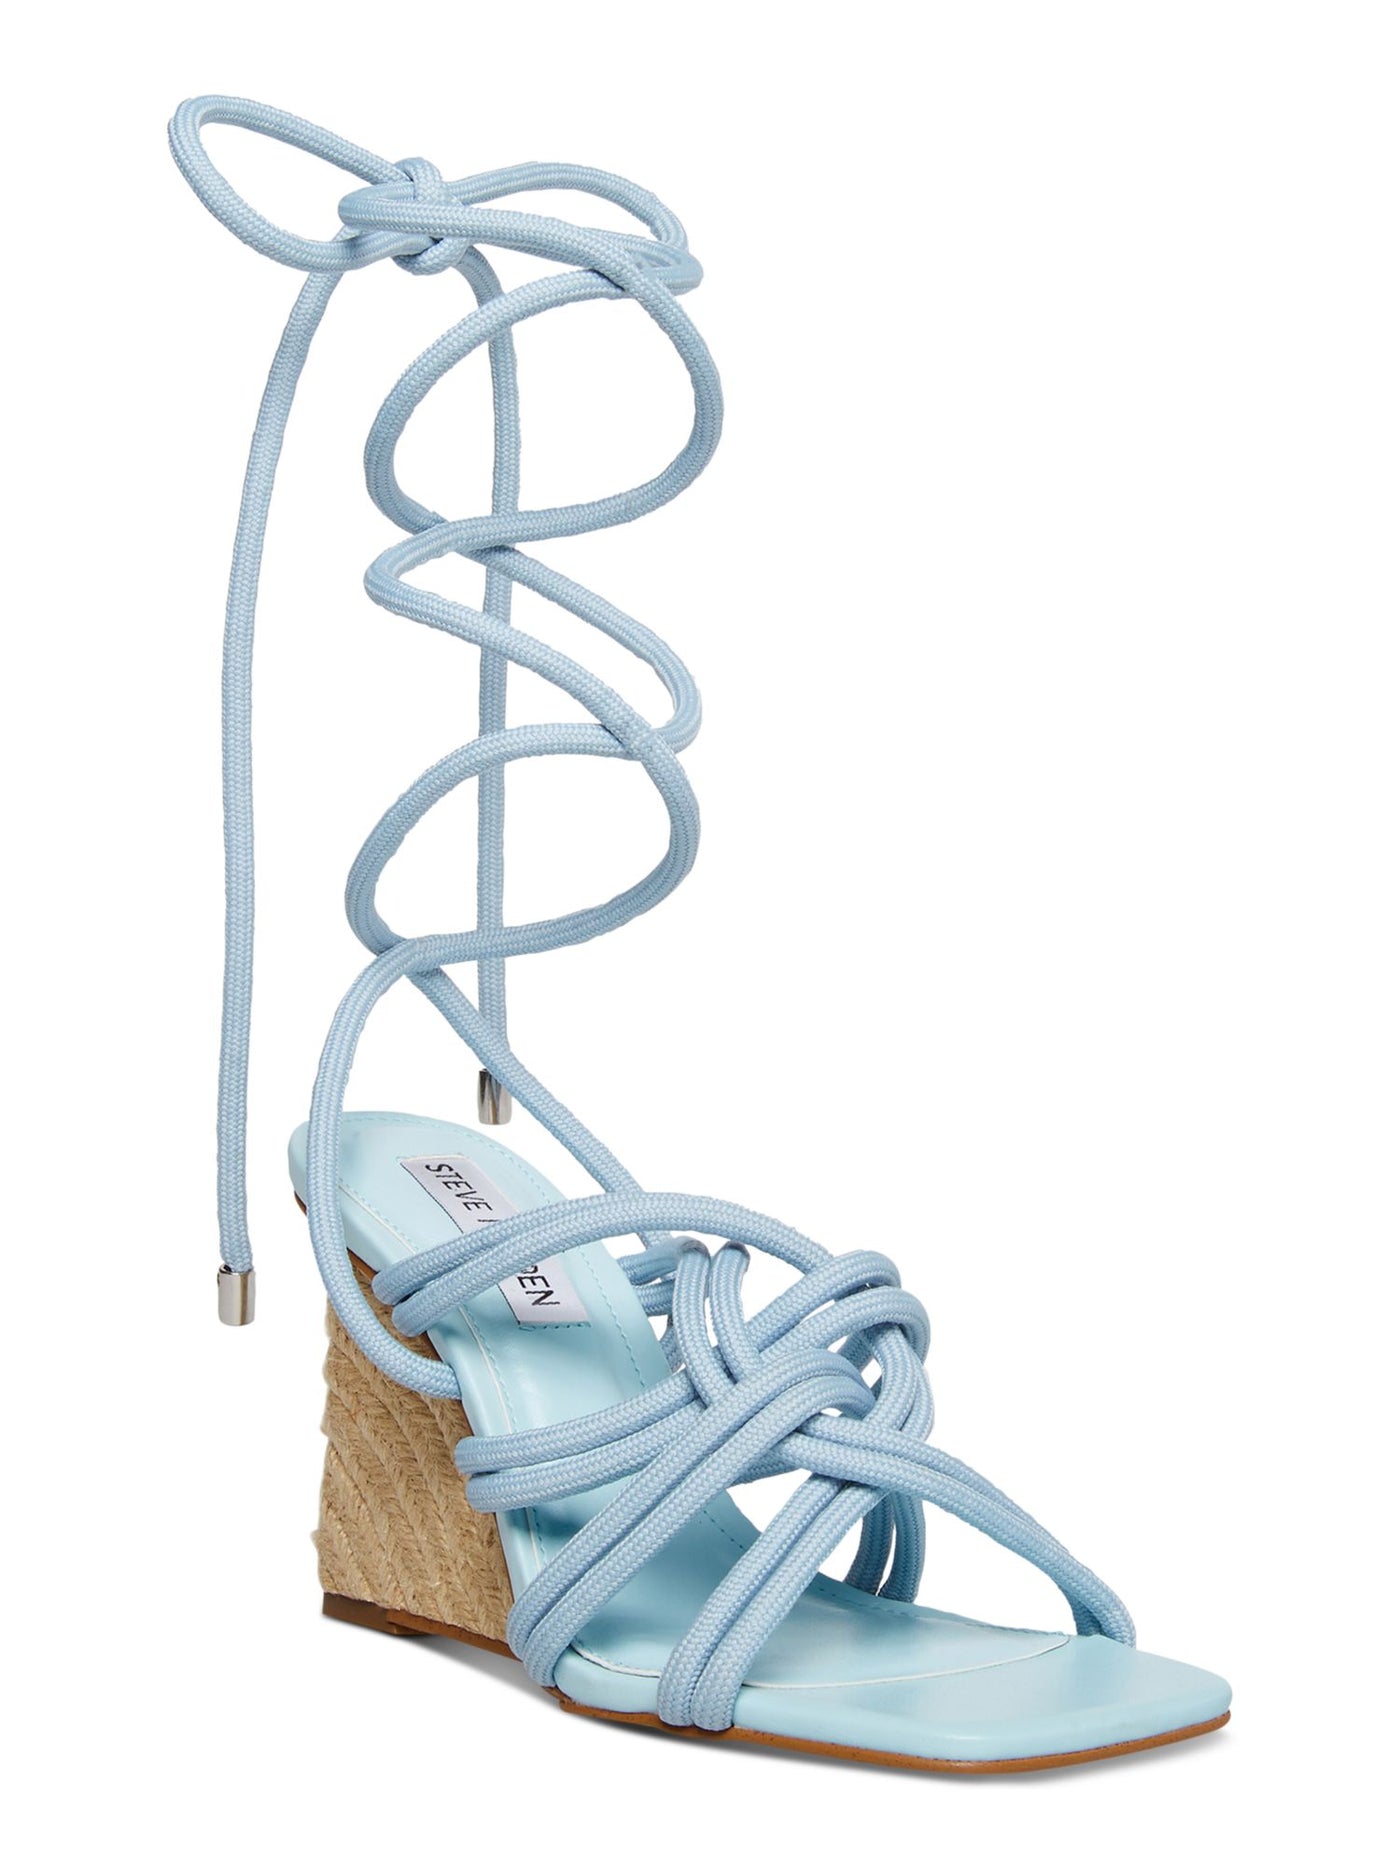 STEVE MADDEN Womens Light Blue Padded Strappy Idolized Square Toe Wedge Lace-Up Dress Espadrille Shoes 8 M